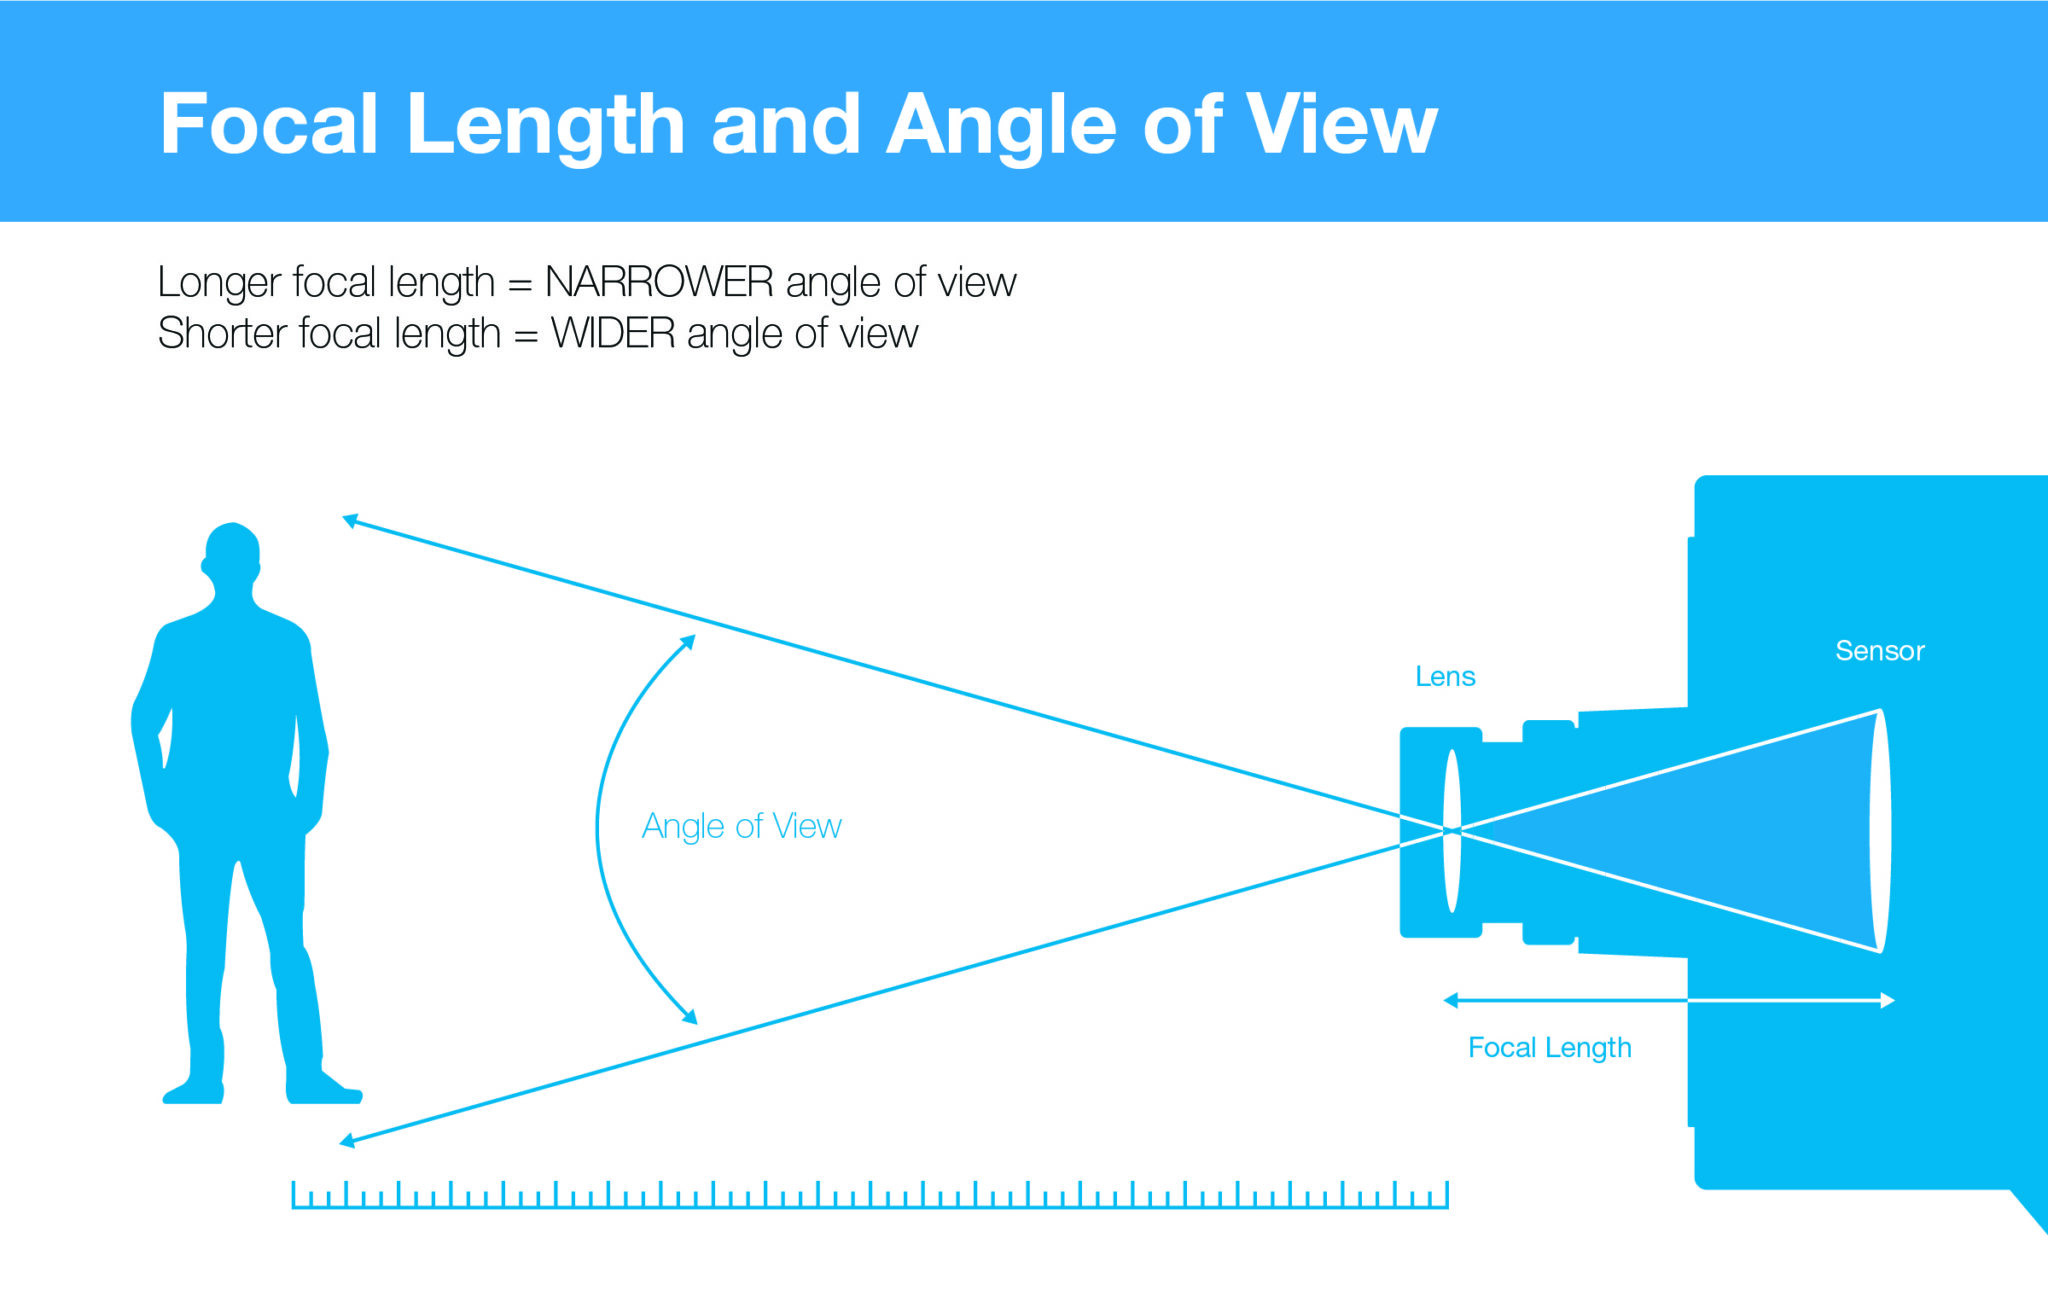 camera-focal-lengths-and-angle-of-view-aov-explained-marshall-electronics